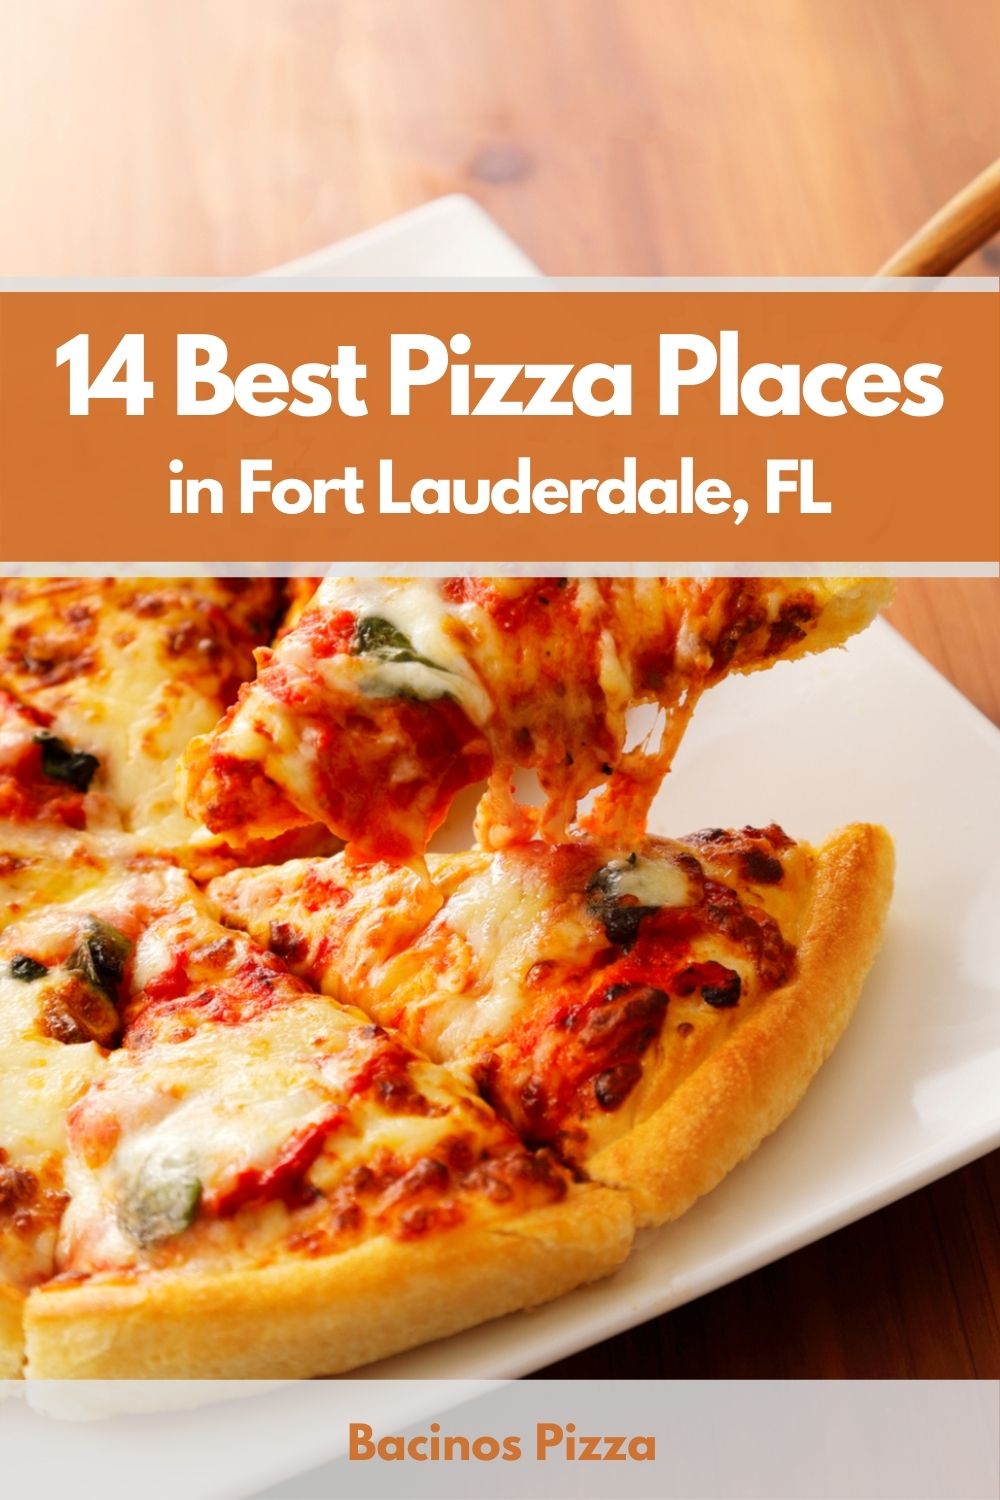 14 Best Pizza Places in Fort Lauderdale, FL pin